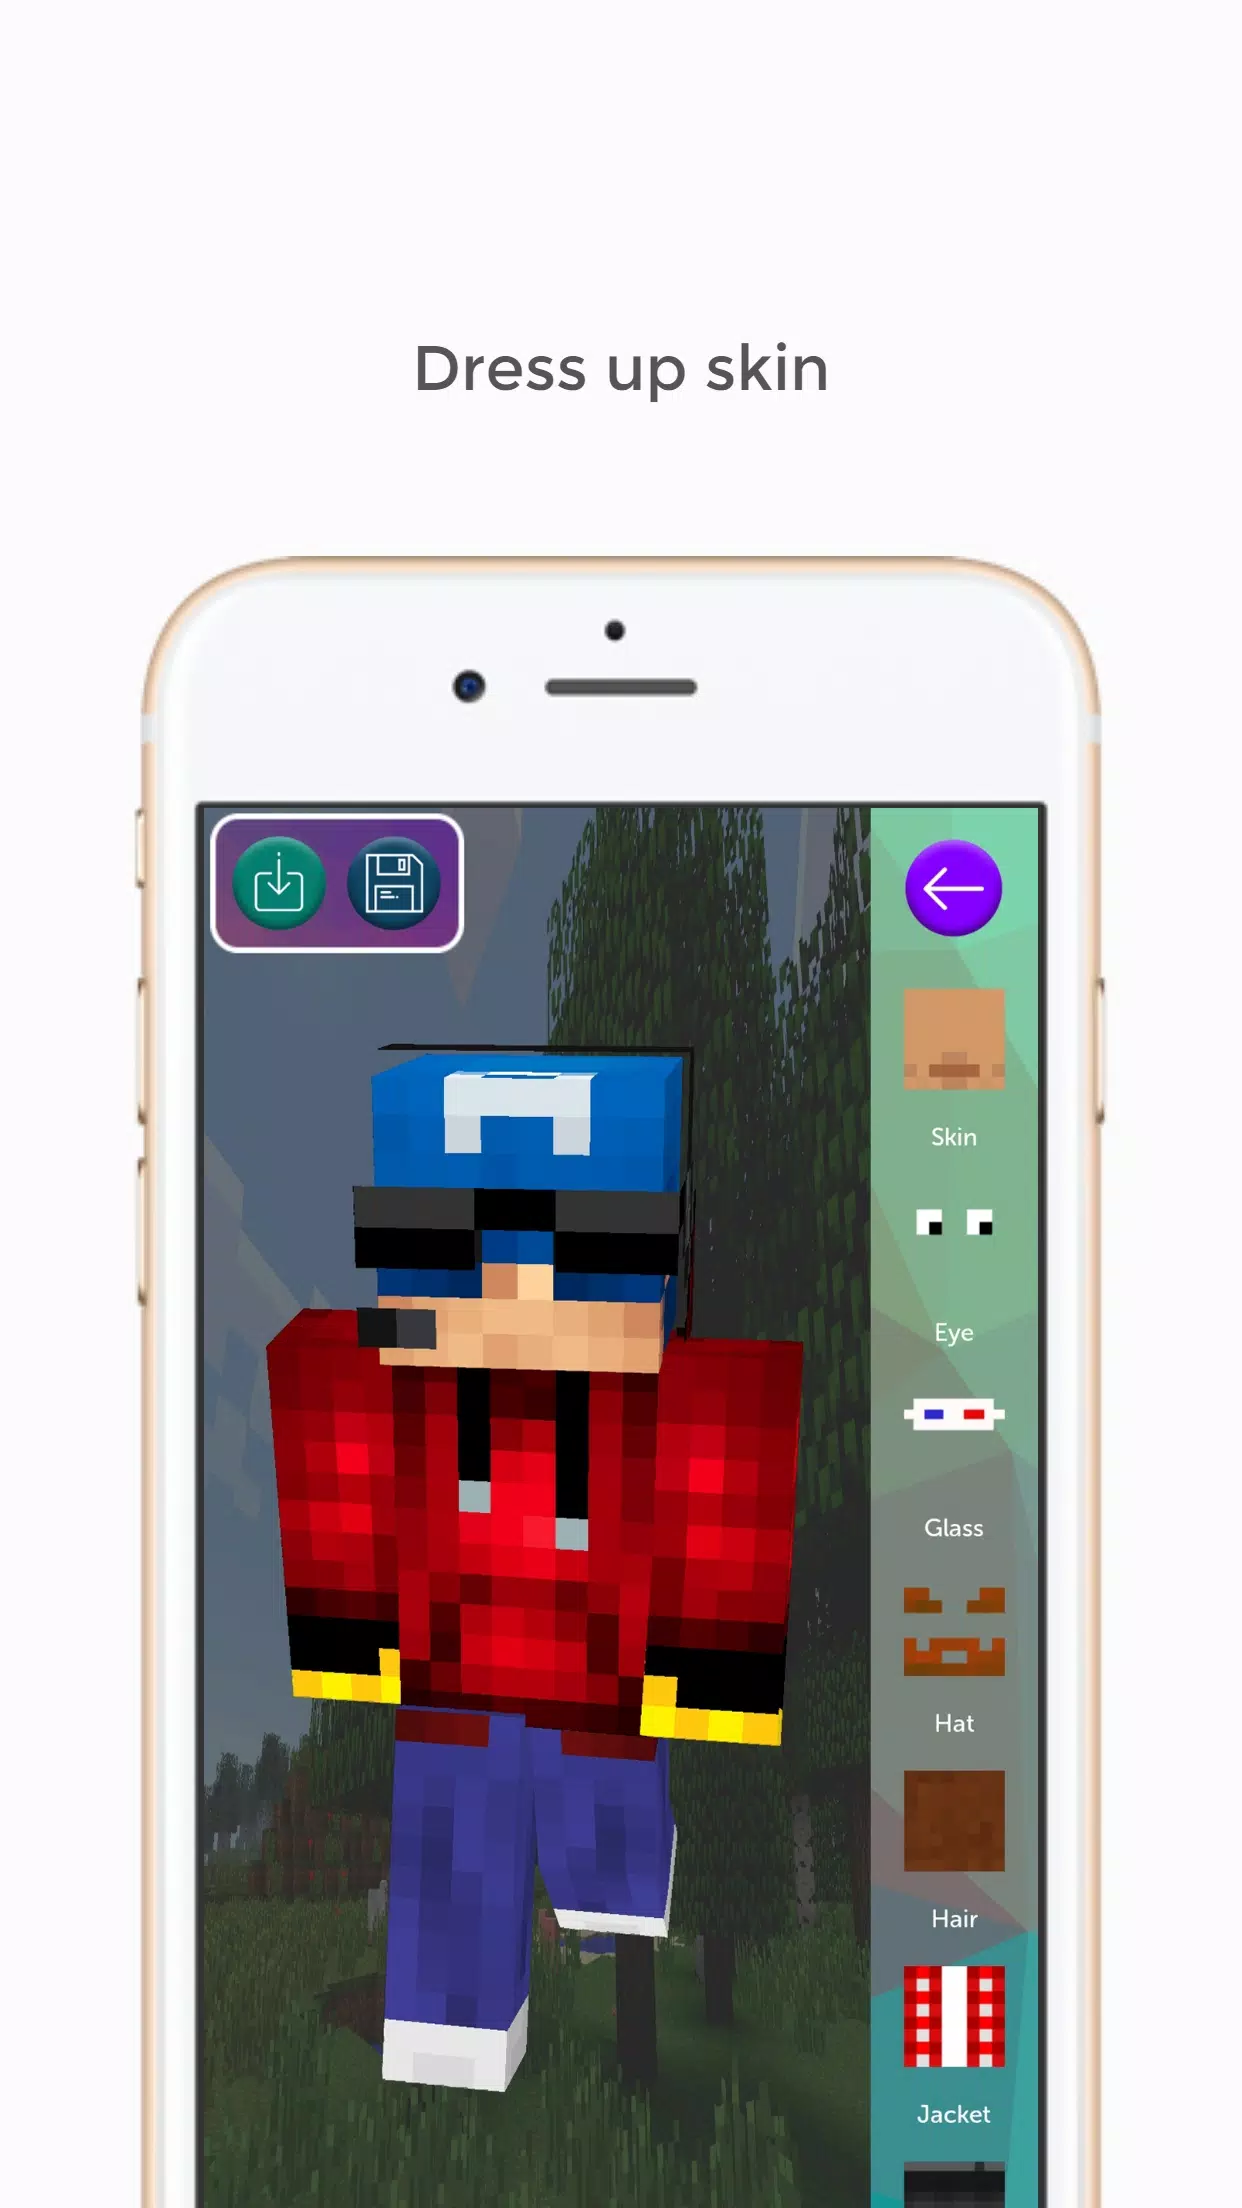 Skin Editor 3D for Minecraft APK for Android Download